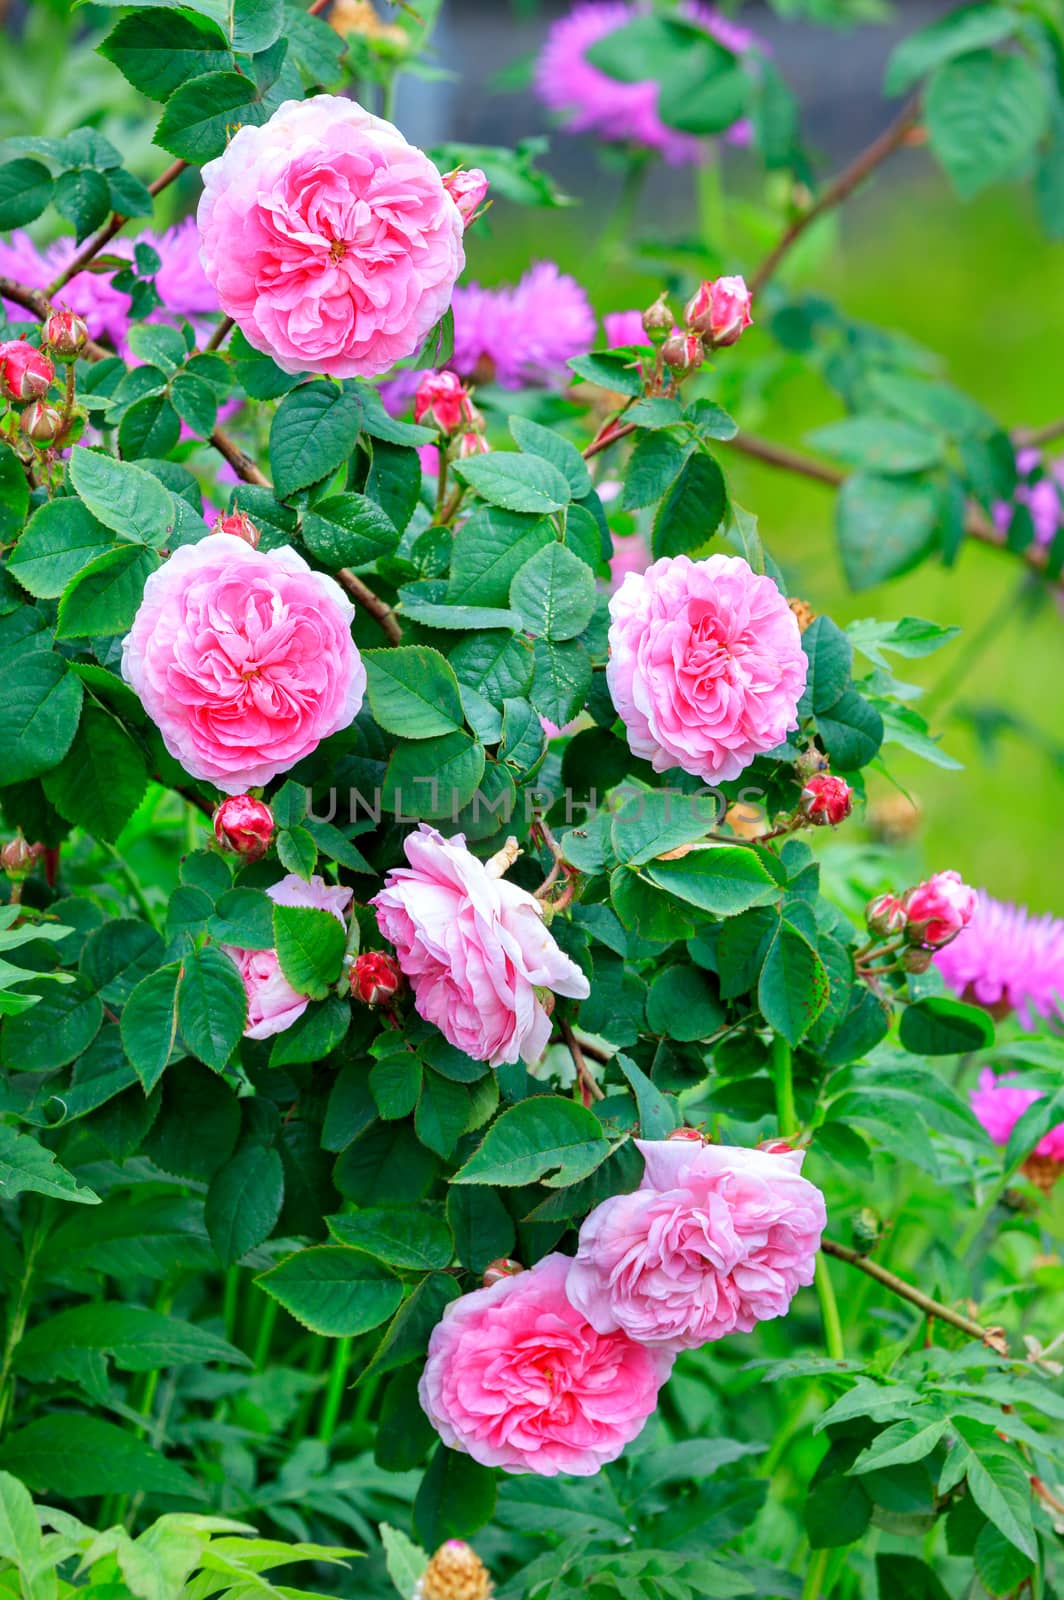 Fresh and bright flowering bush of pink tea rose in a spring garden.